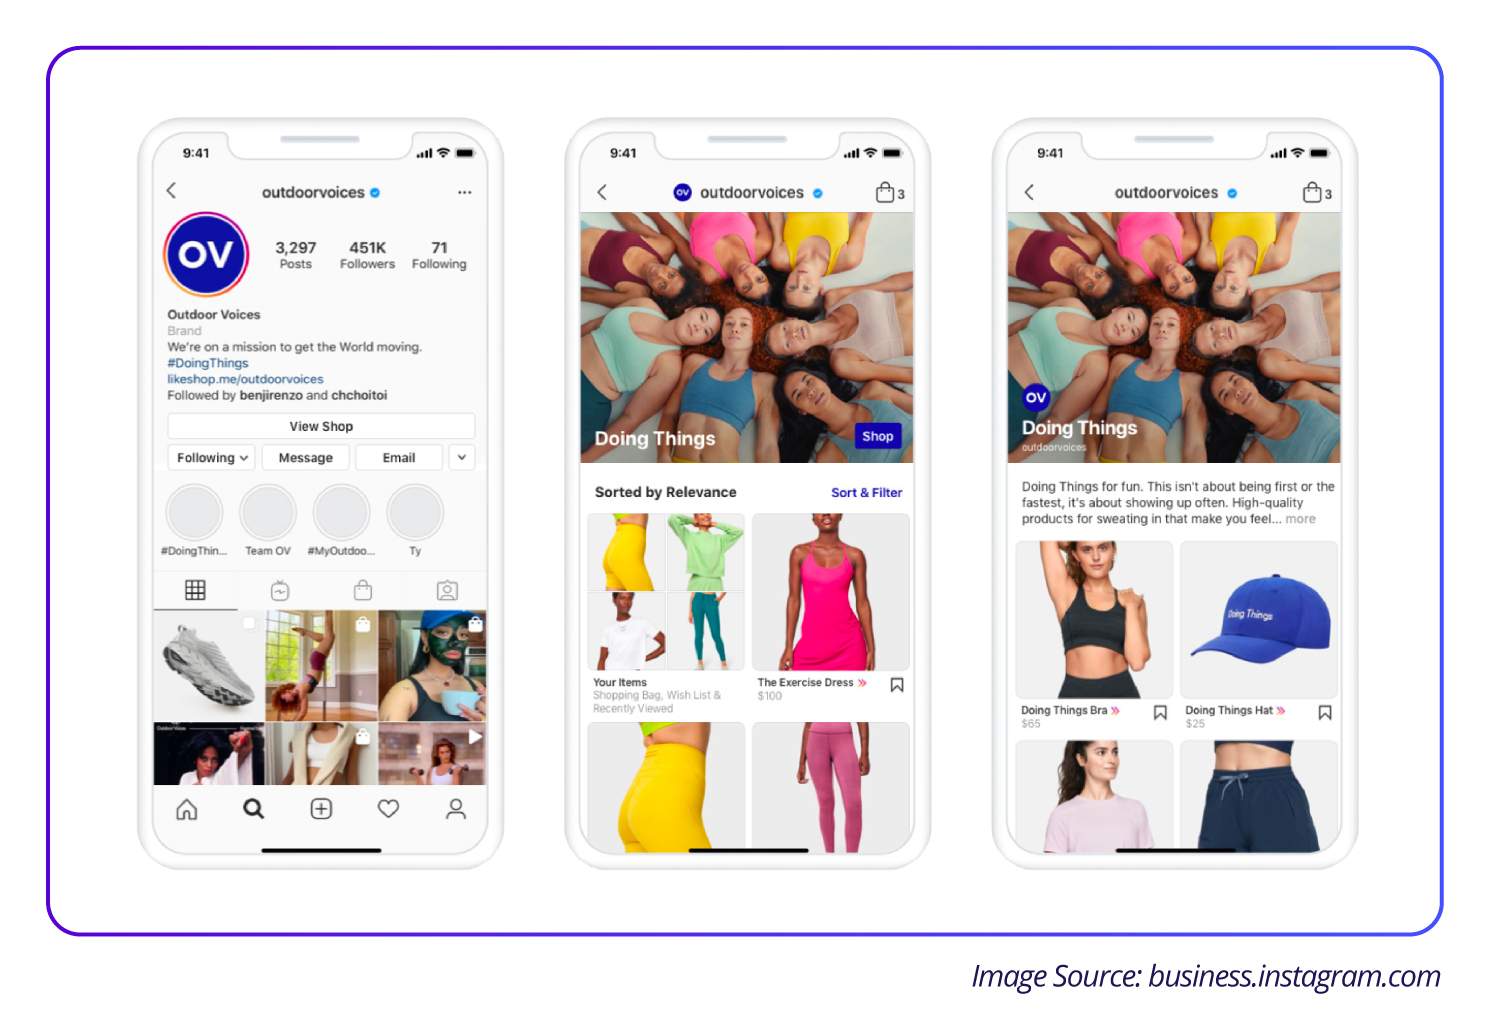 Image contains different ways to showcase product via Instagram Shop